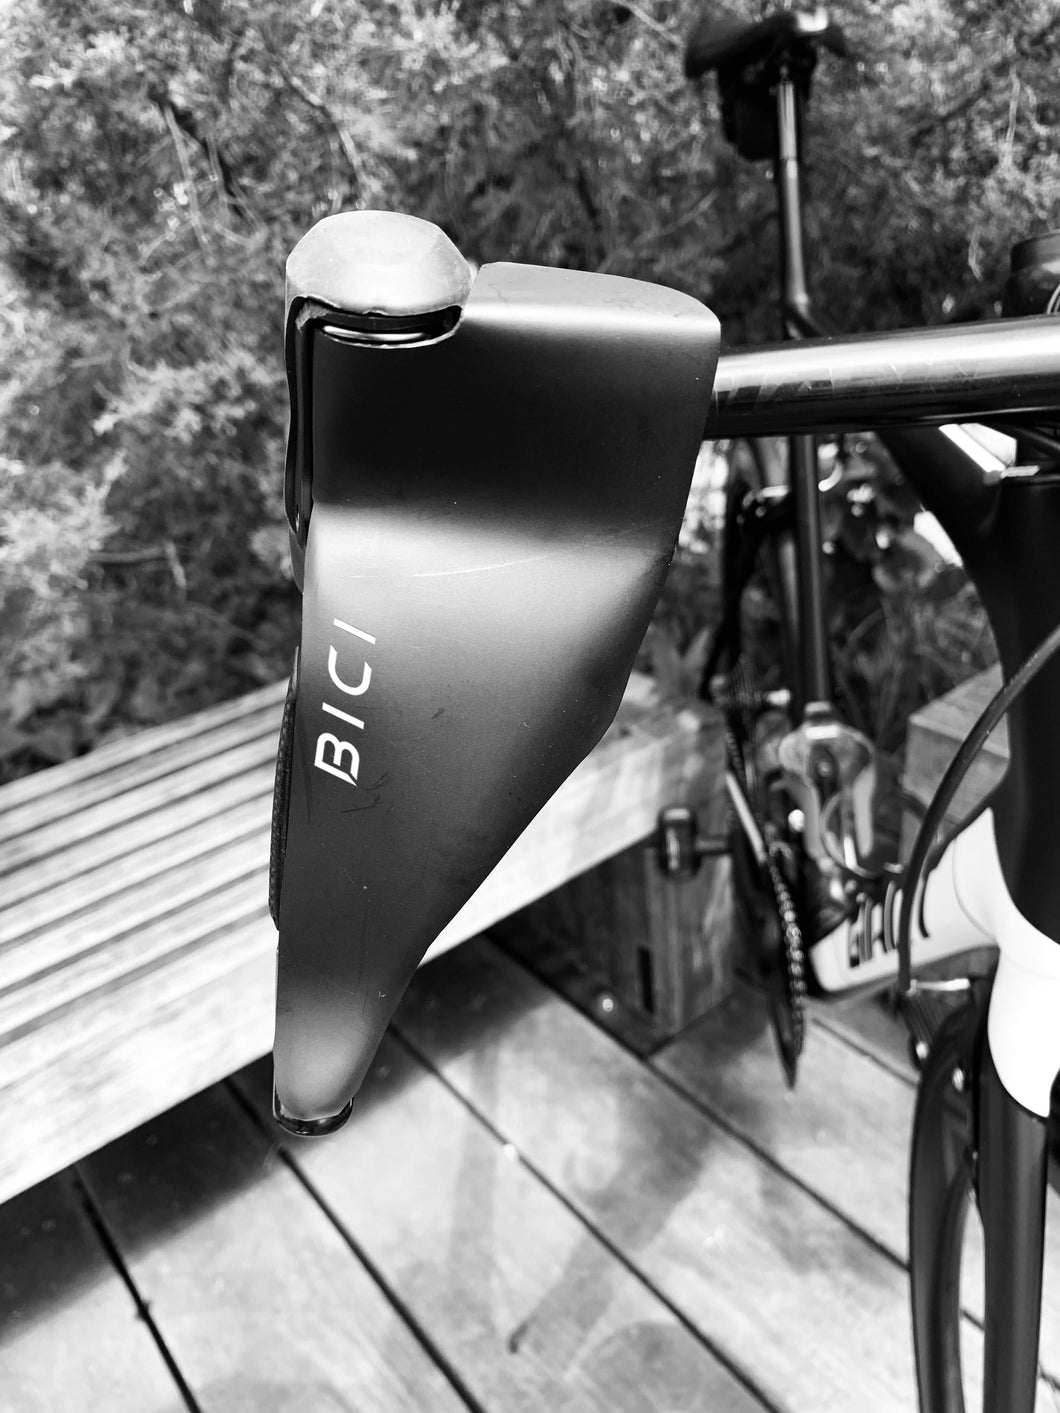 Close up of road bike handlebars with the newest must have winter cycling accessory, The Bici Shield, attached to its brake lever. This streamlined black abs hand protector shields a riders hands from the cold while cycling in the winter.